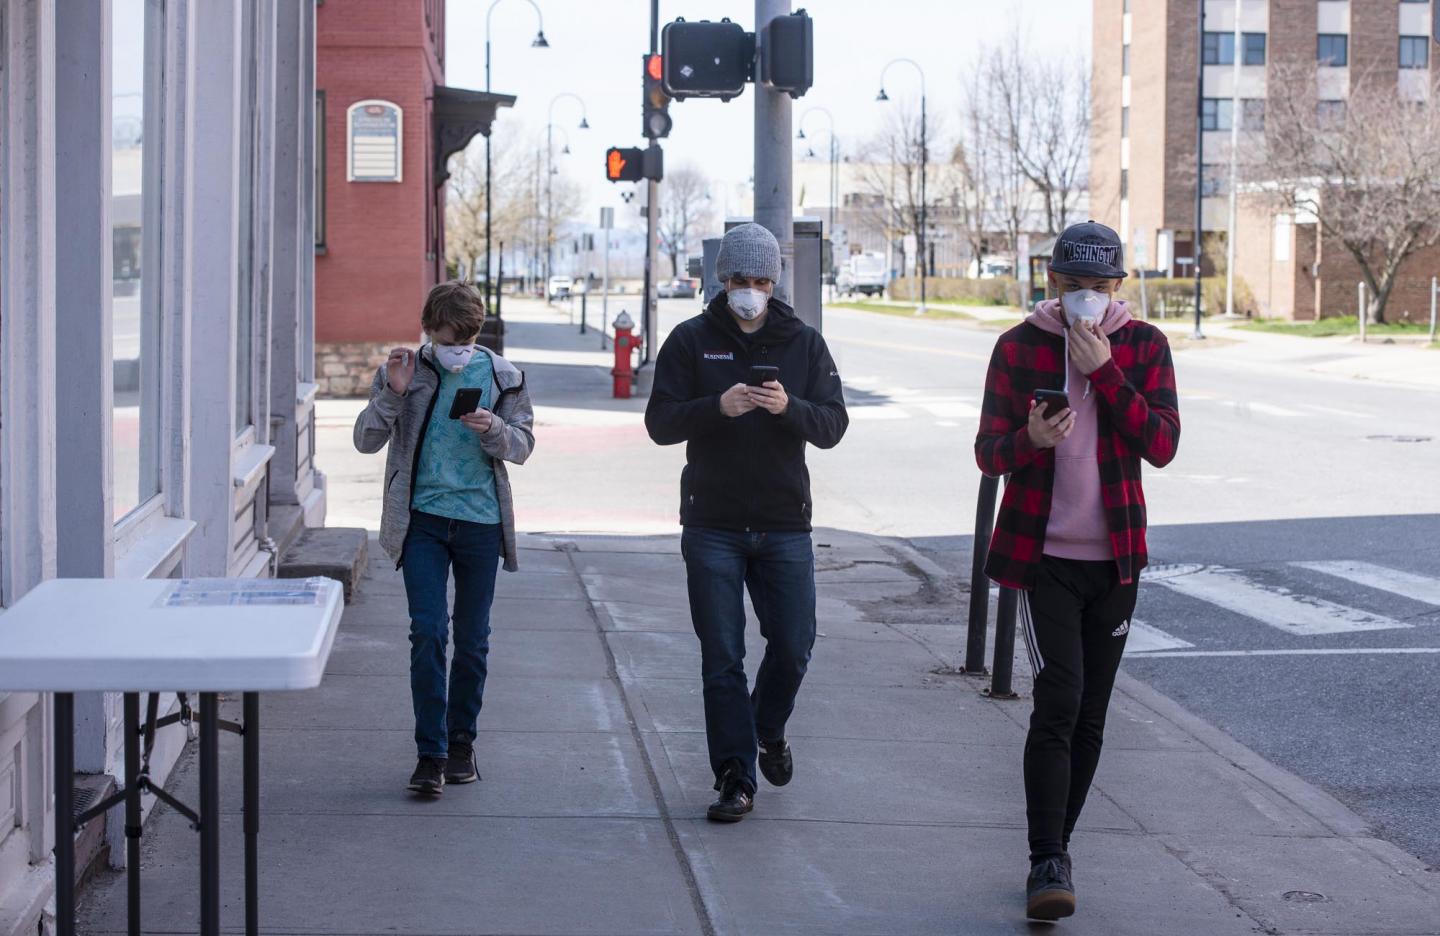 Vermonters Overwhelmingly Support Wearing Face Masks